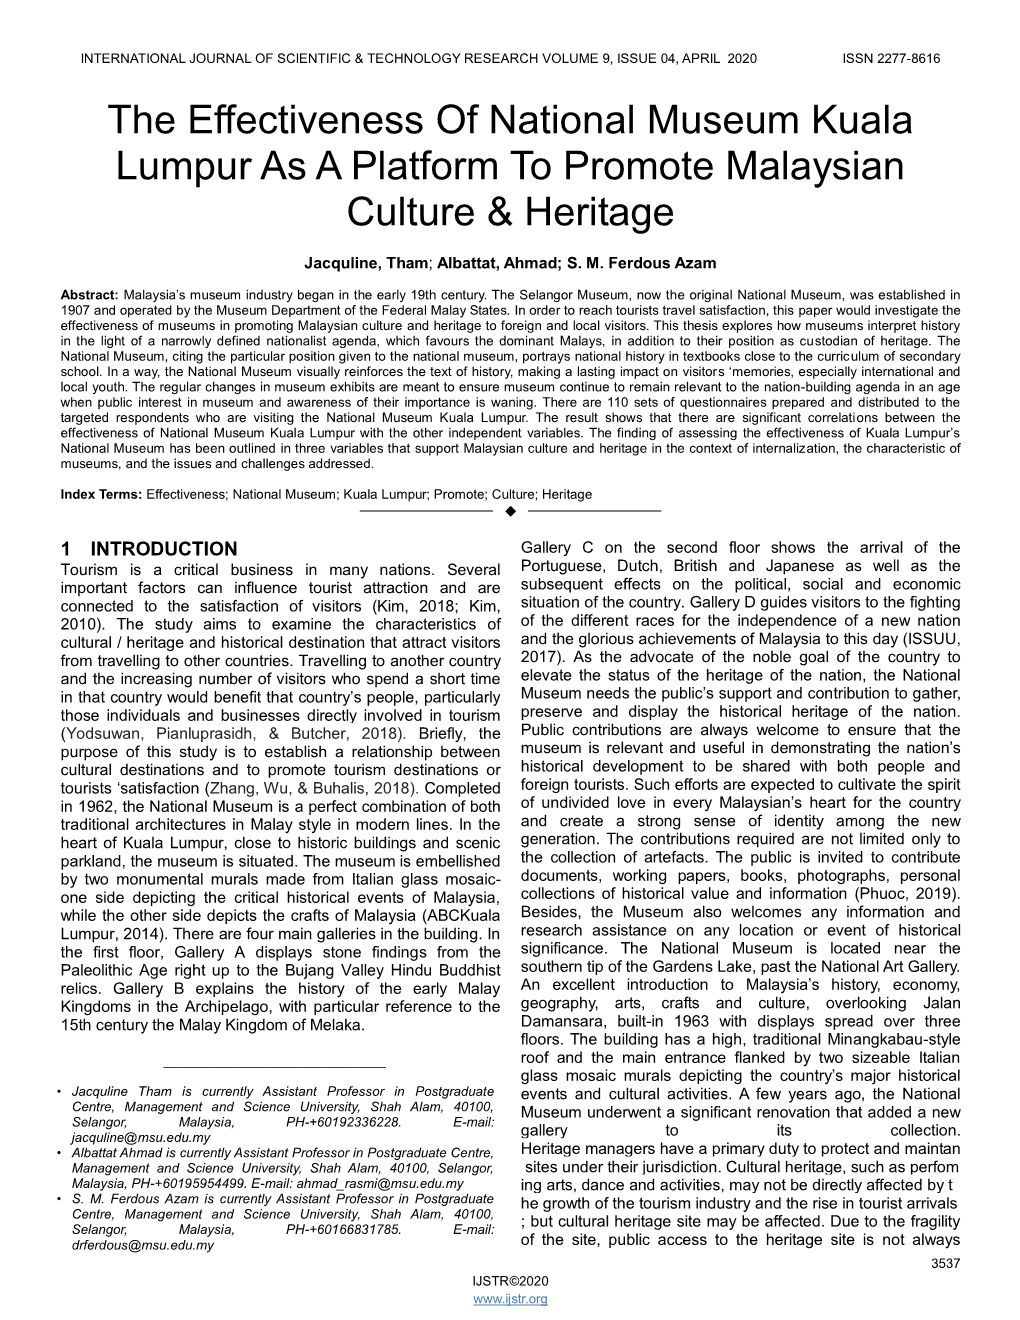 The Effectiveness of National Museum Kuala Lumpur As a Platform to Promote Malaysian Culture & Heritage